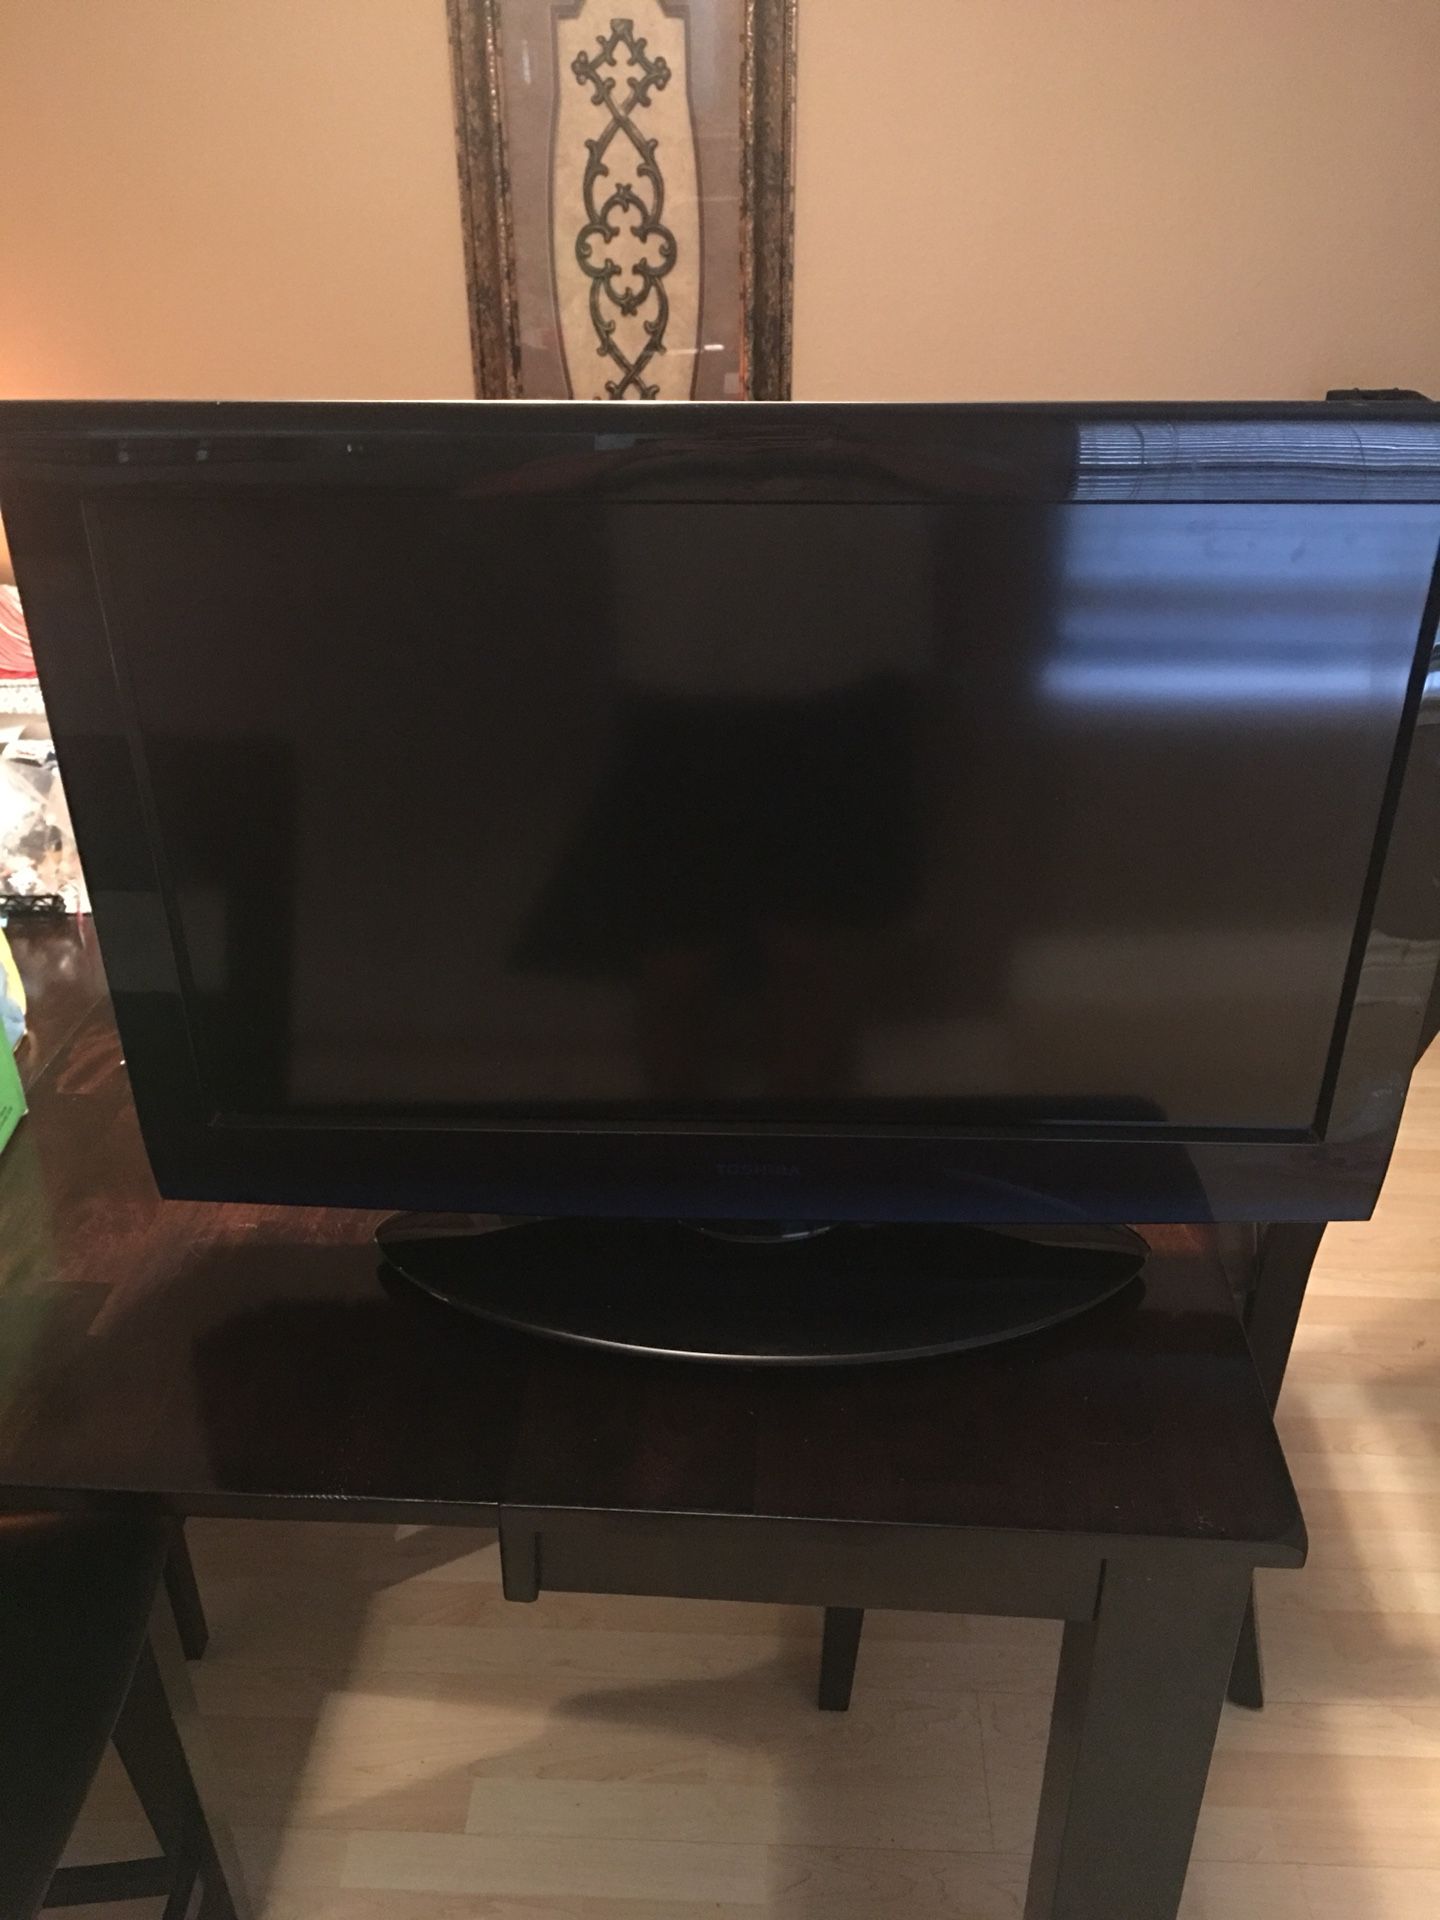 Toshiba 32 inch Tv, normal wear with no remote